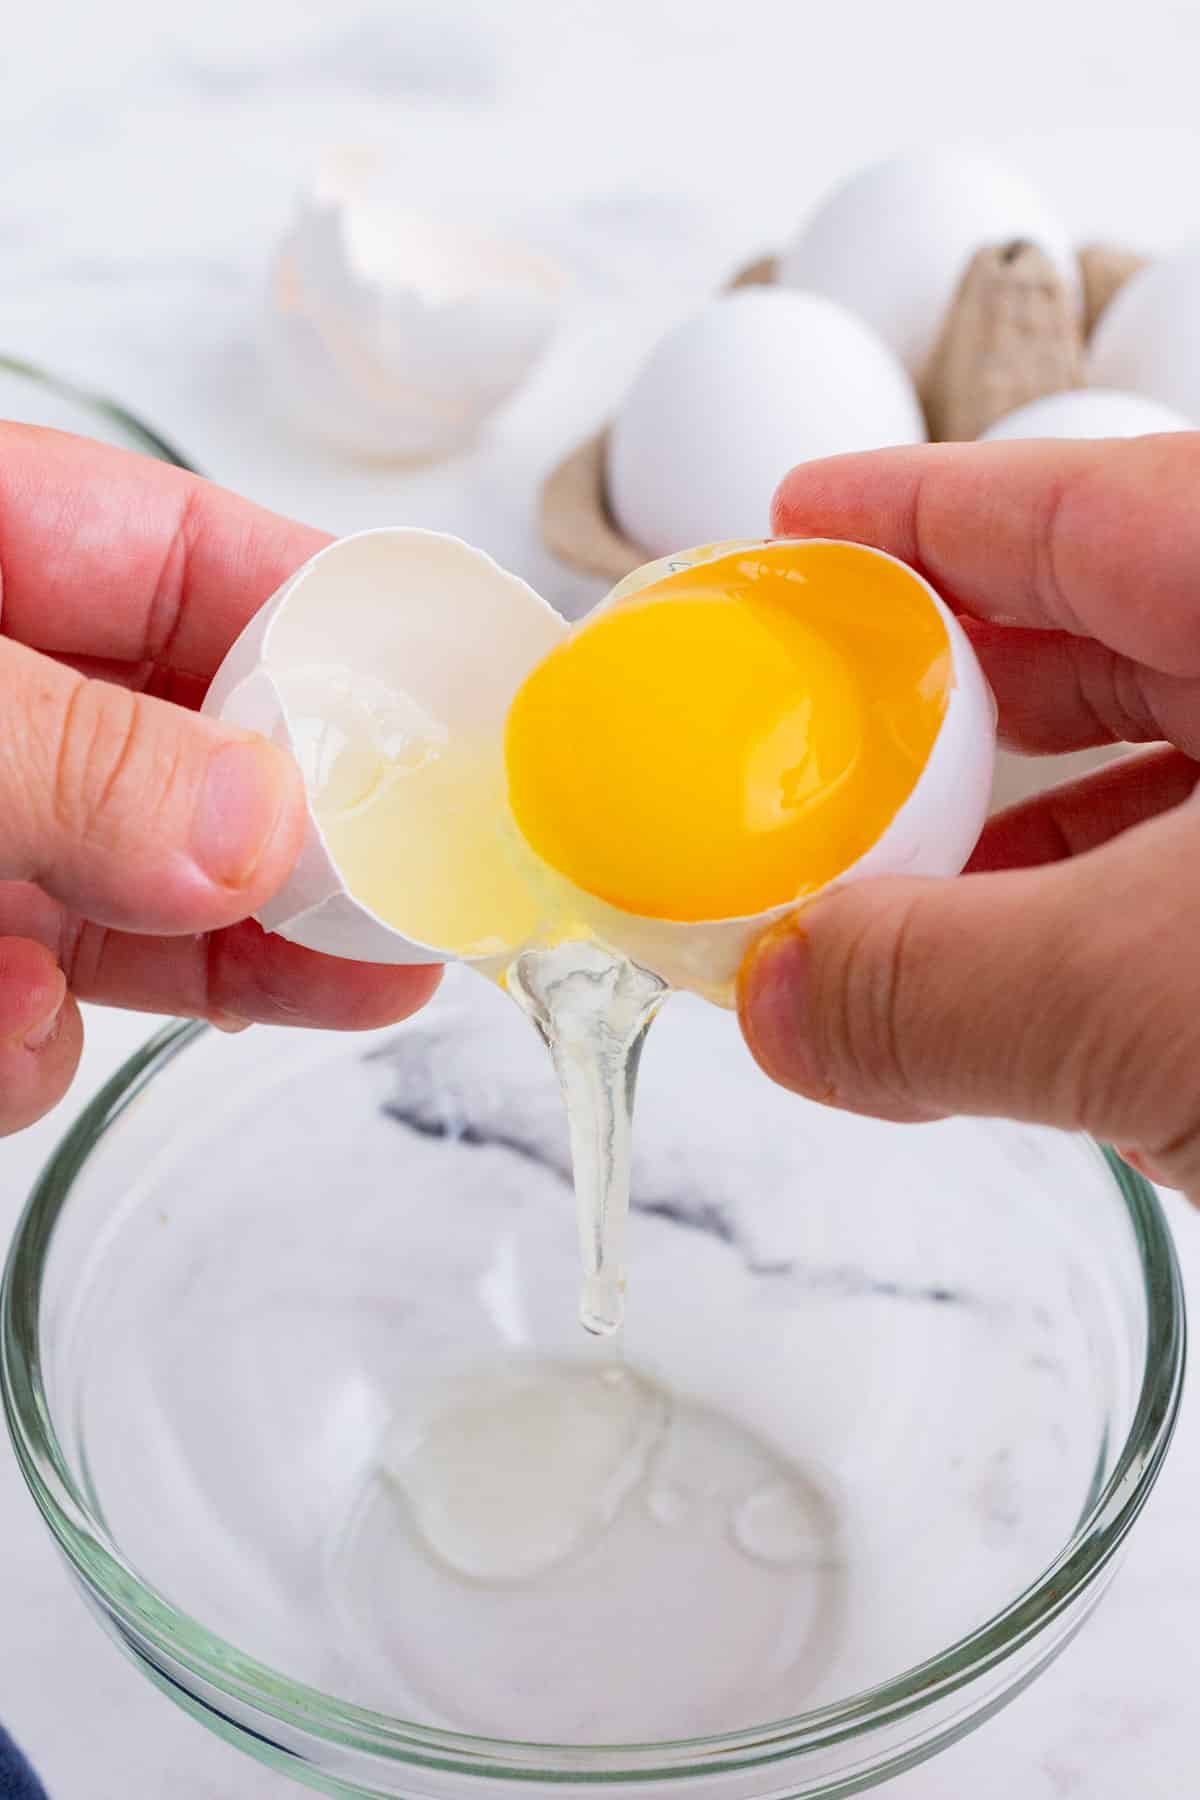 A cracked open egg with an egg yolk being tossed between the shell halves with the whites falling into a bowl beneath.